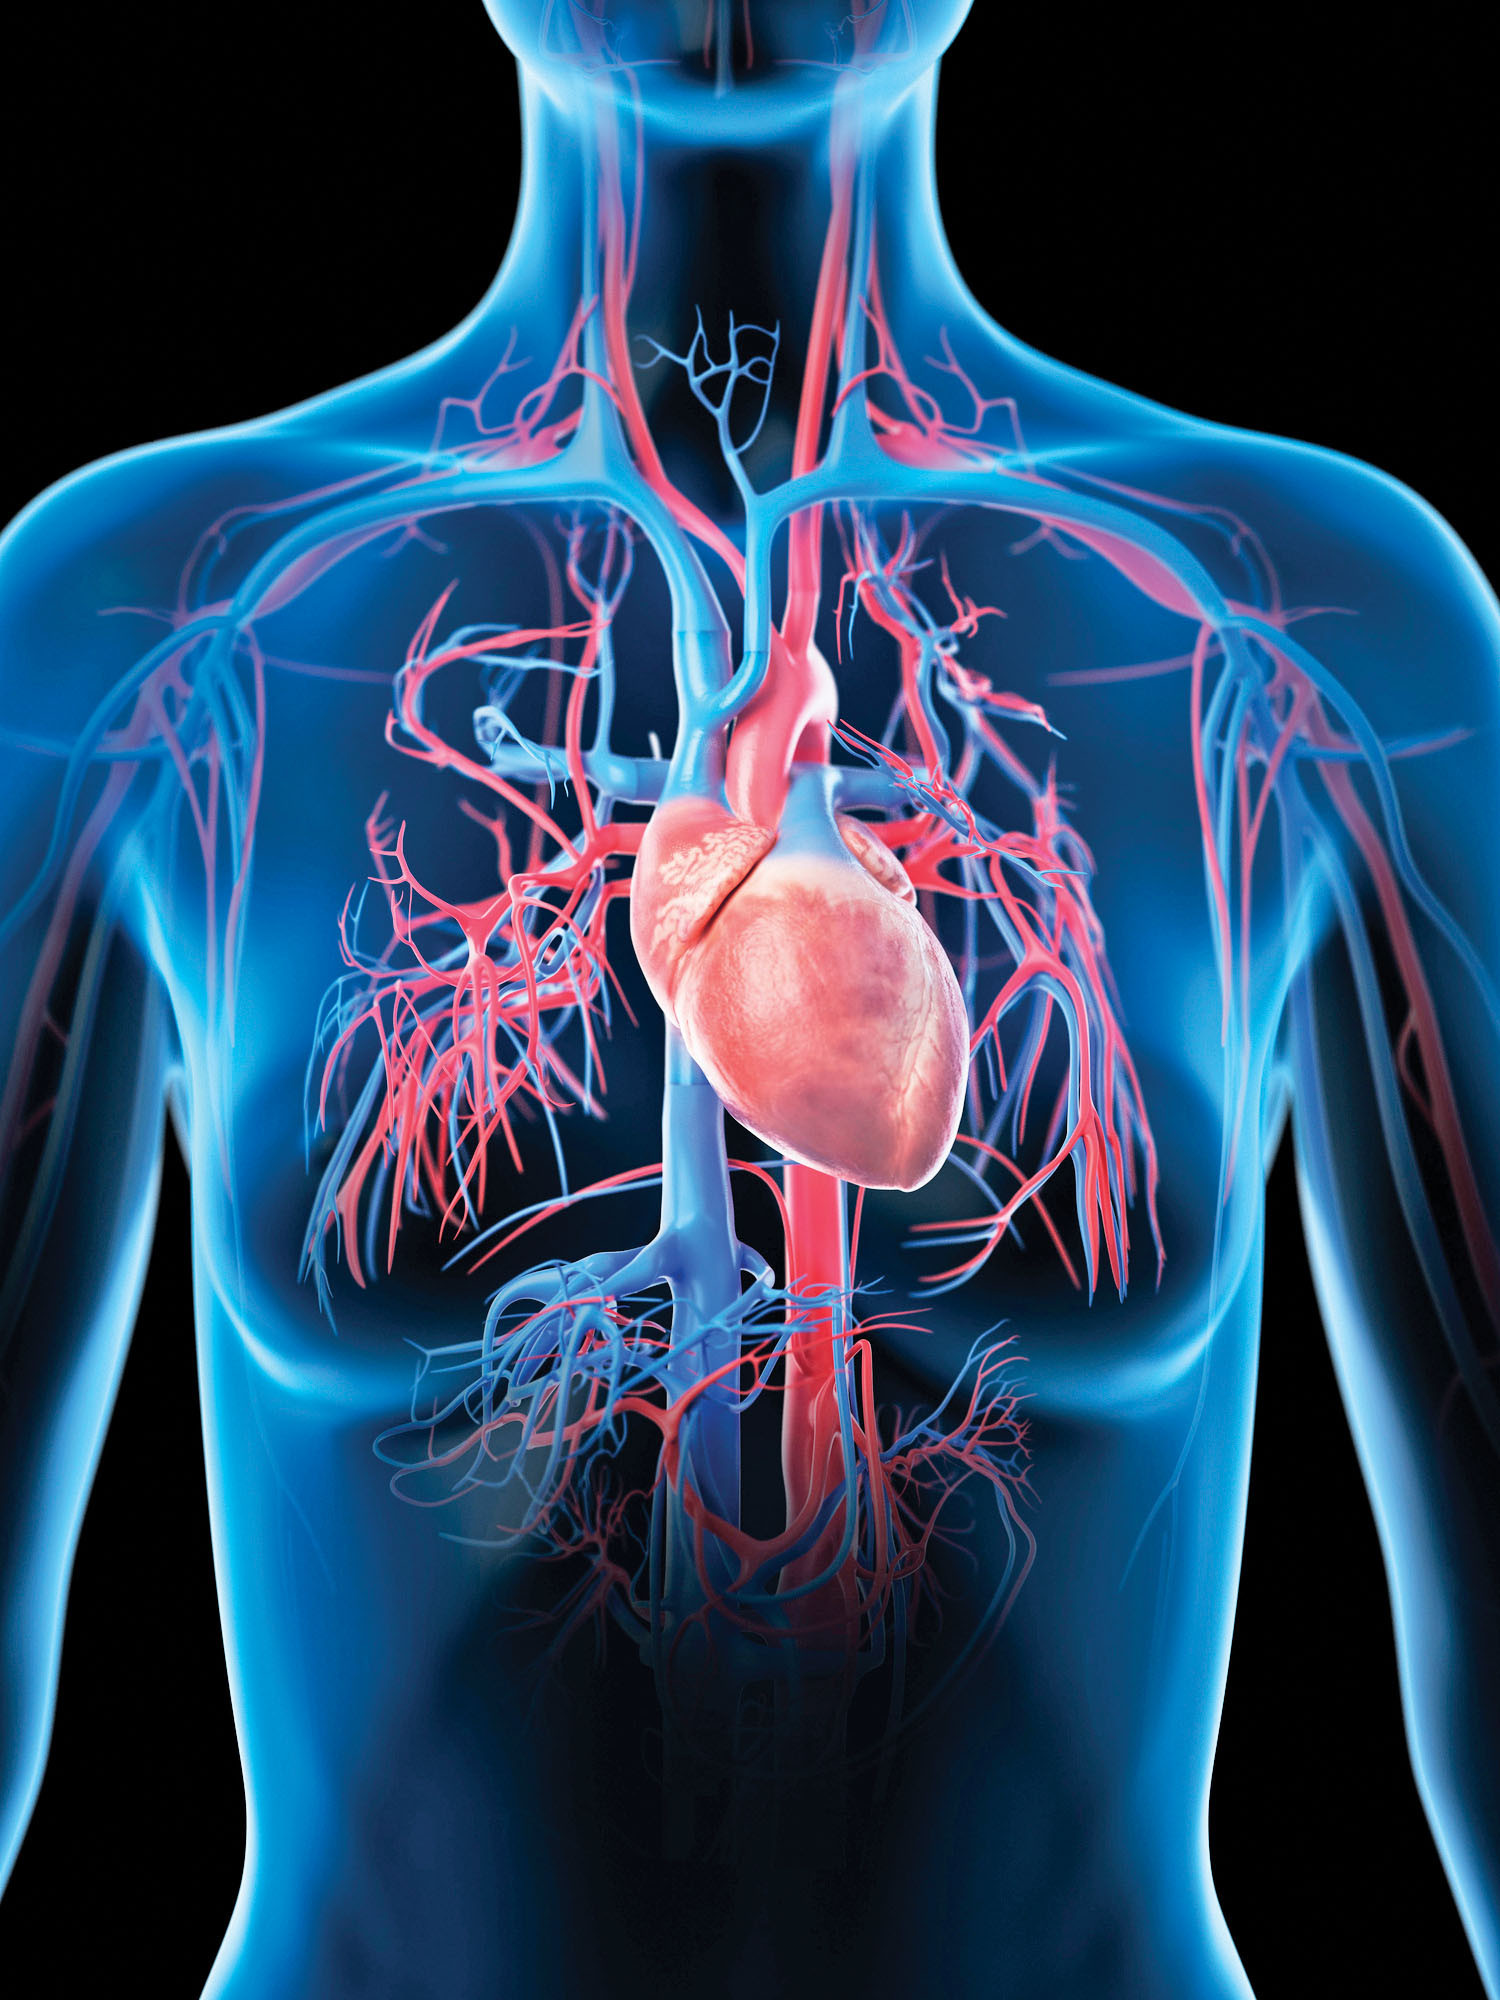 photo-illustration of a woman's torso showing a transparent body in blue and the heart and arteries in red, all on a black background